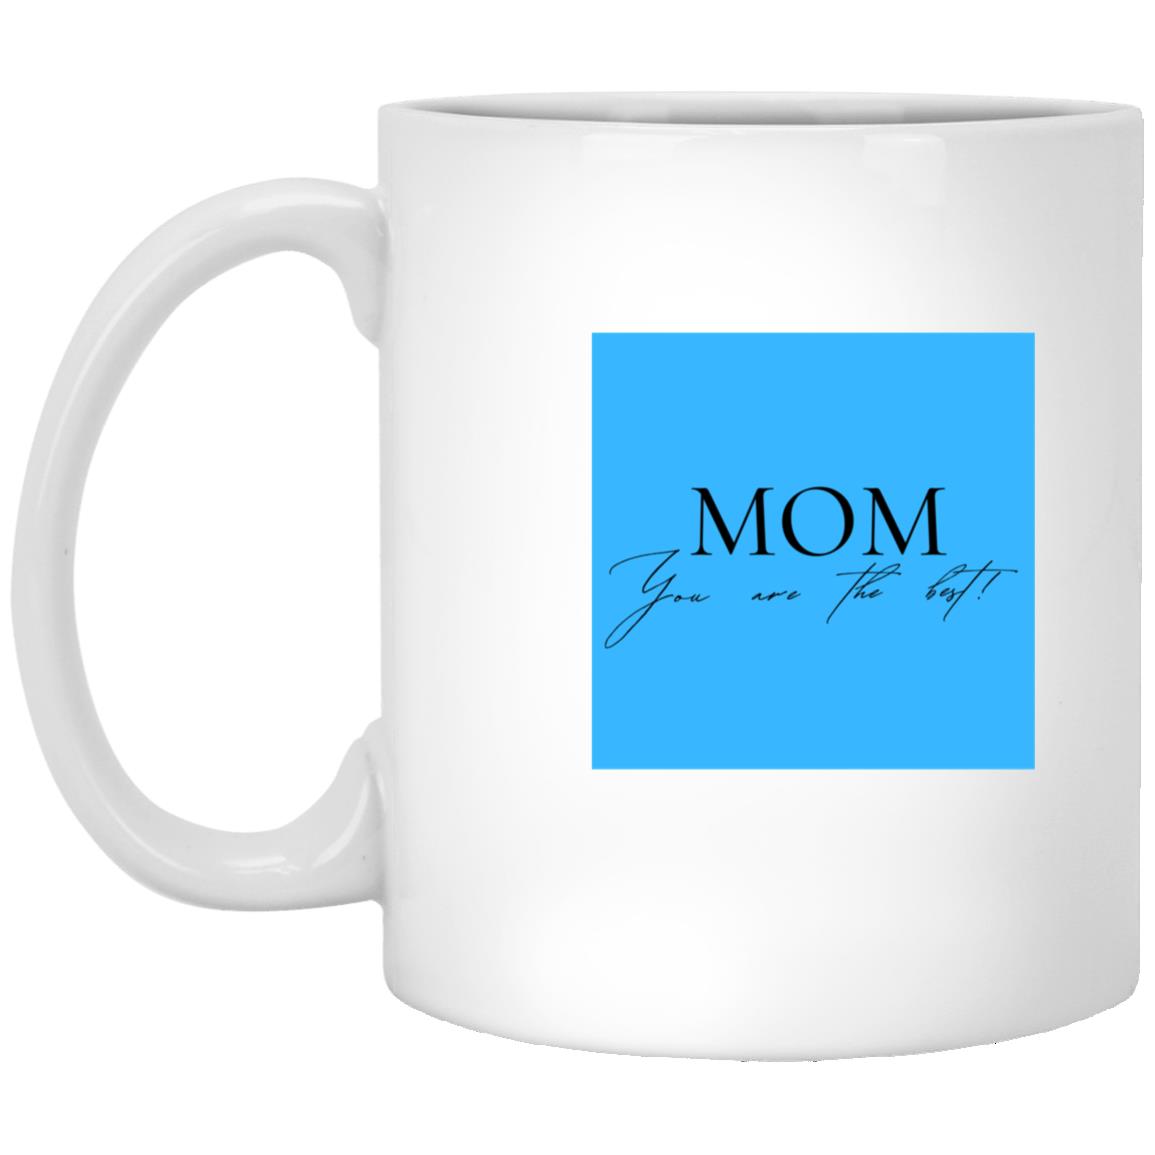 Mom You are the best -  White Mug Style 33